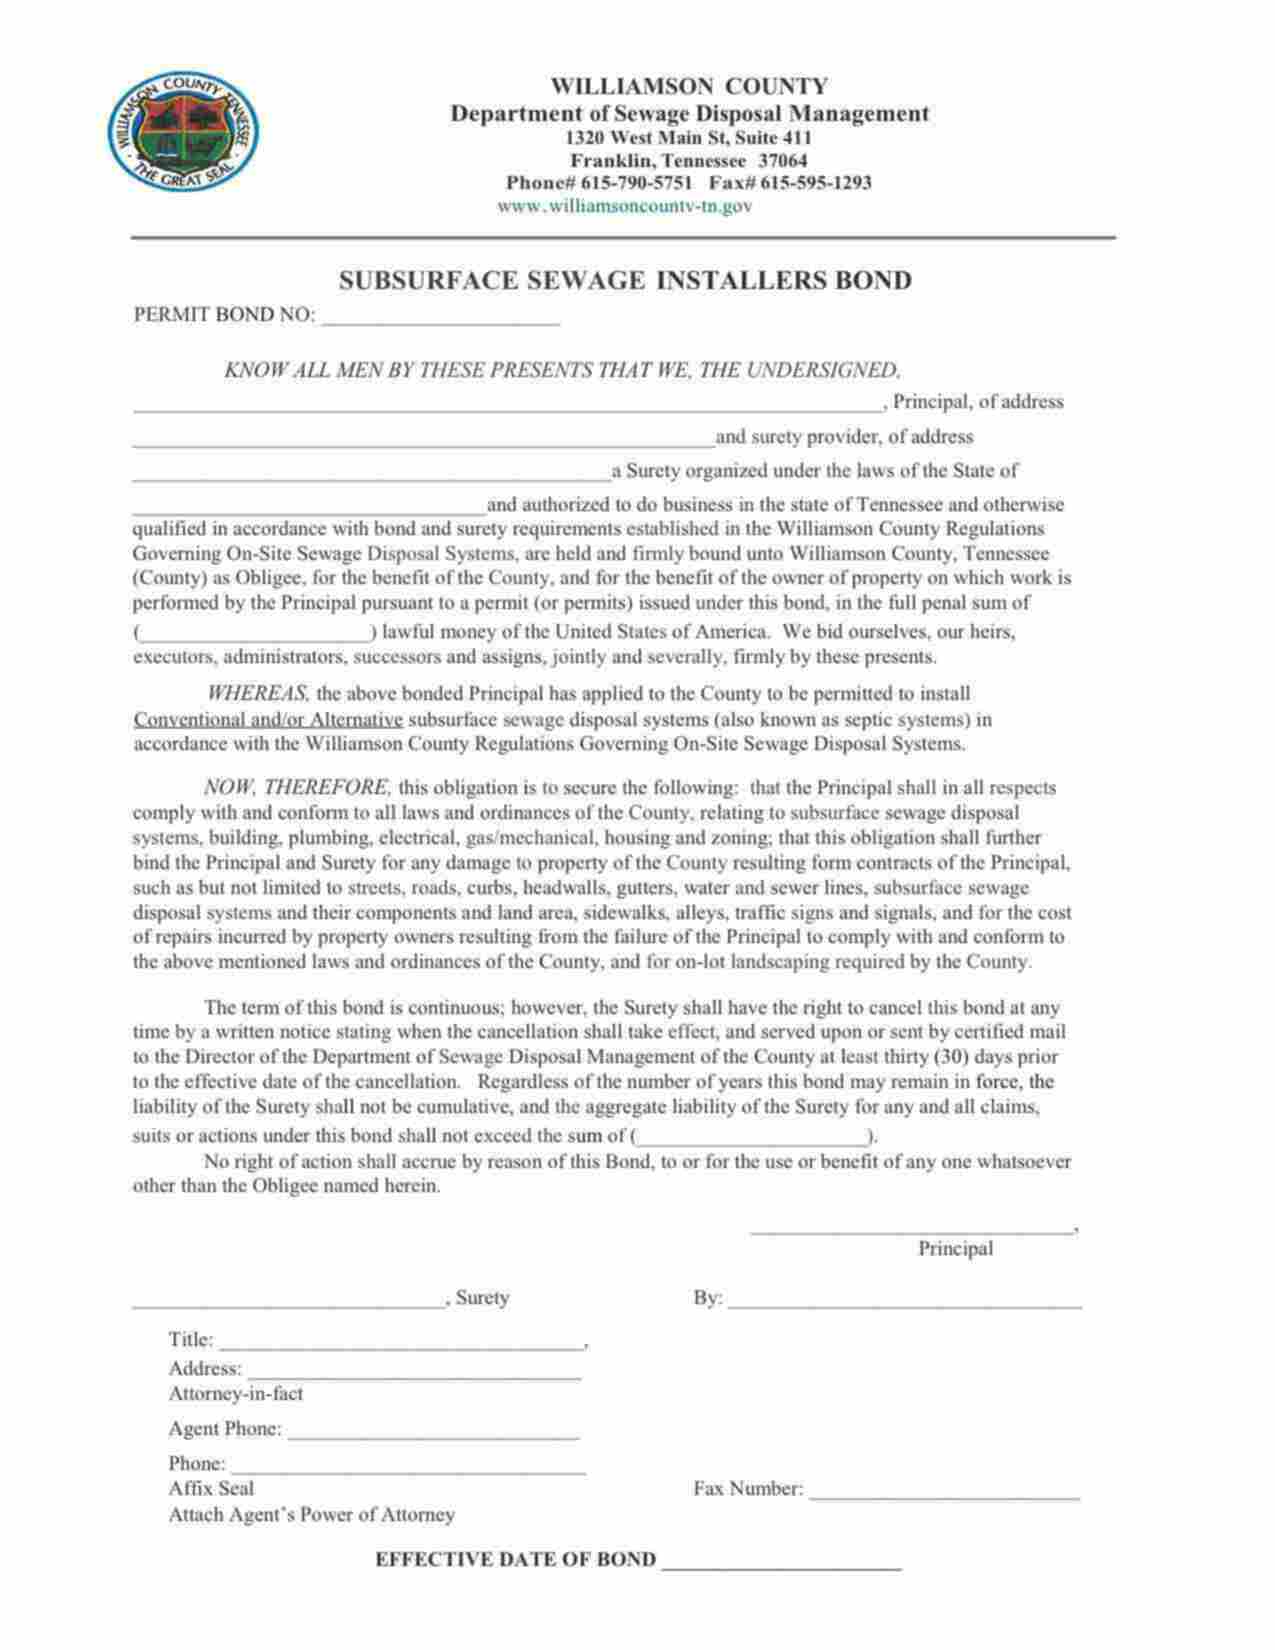 Tennessee Subsurface Sewage Installer Bond Form